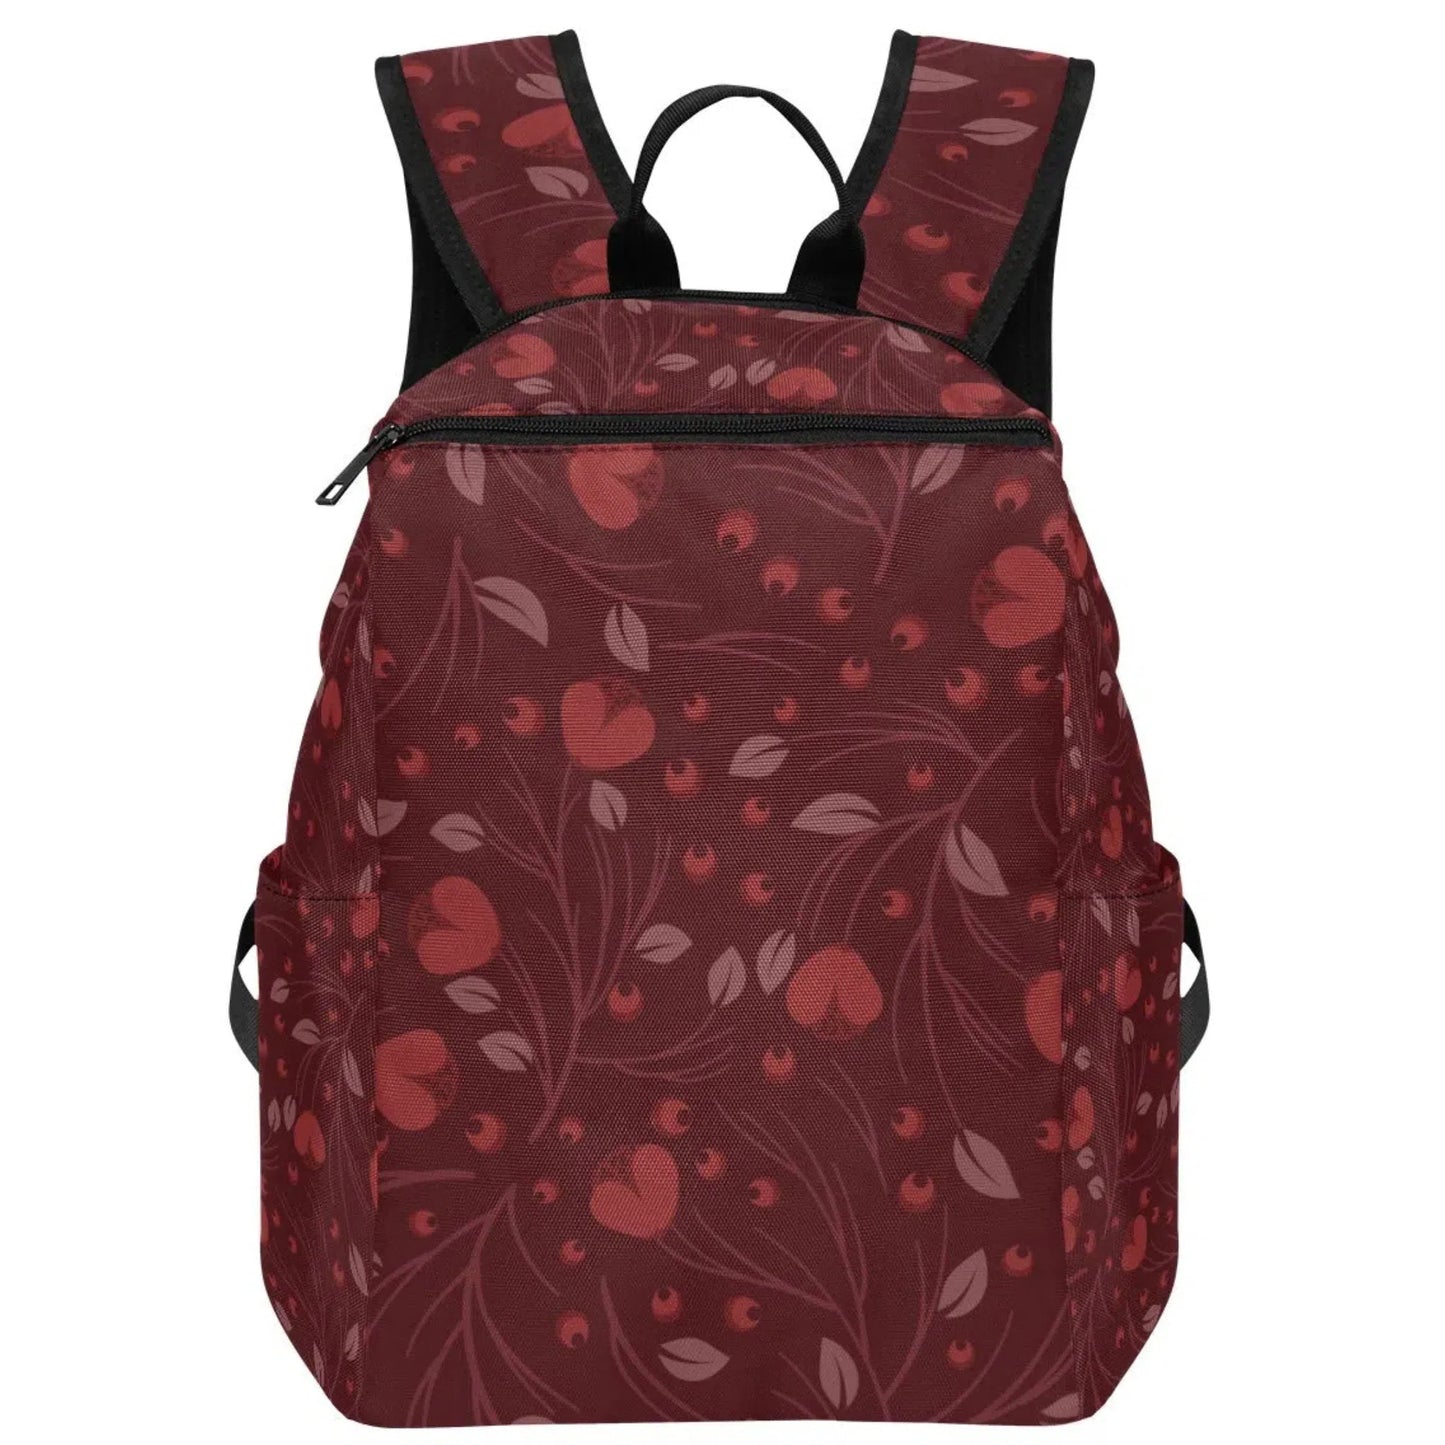 floral backpack for ladies red poppy by Abebe + Booker